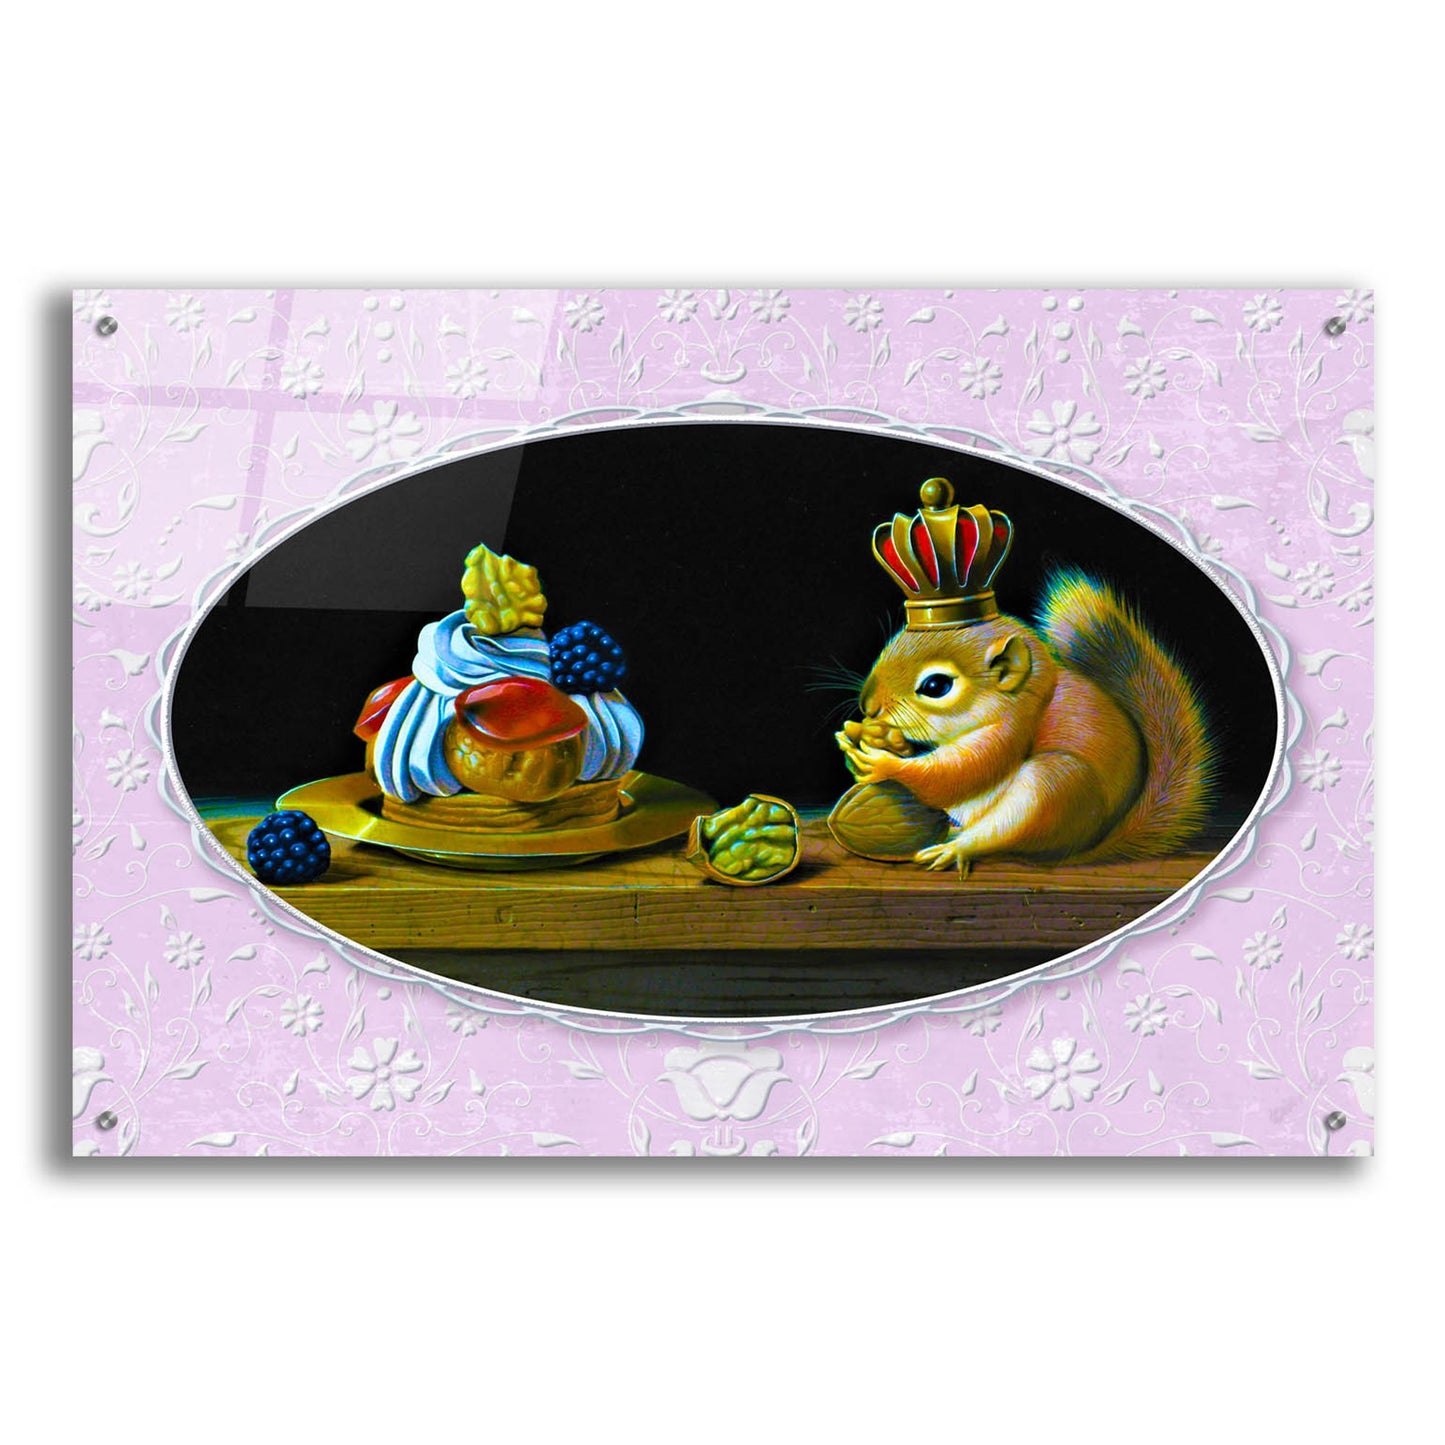 Epic Art 'The Squirrel And The Cake' by Valery Vecu Quitard, Acrylic Glass Wall Art